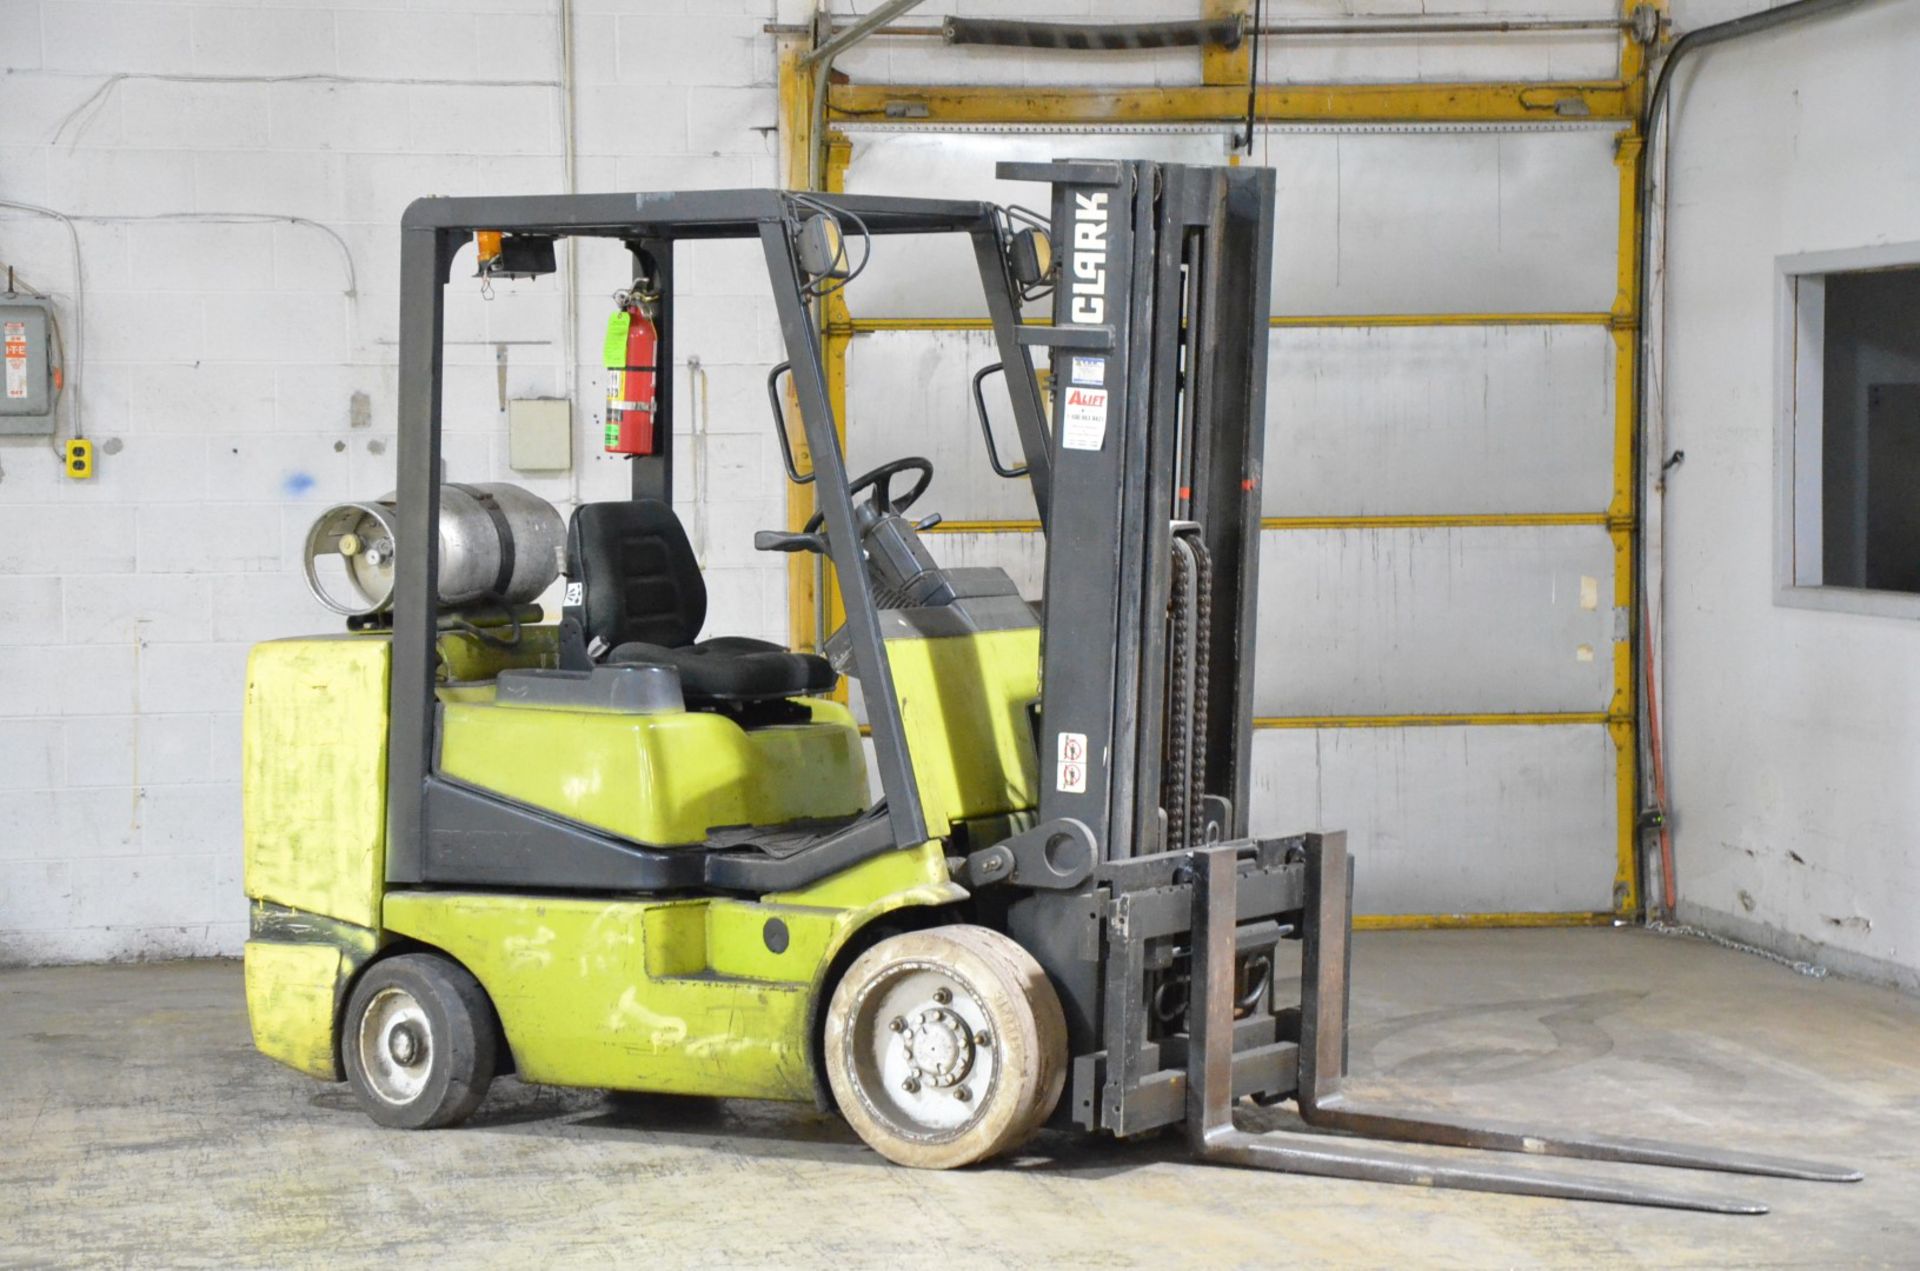 CLARK CGC32 5,900 LB. CAPACITY LPG FORKLIFT WITH 189" MAX. LIFT HEIGHT, 2-STAGE MAST, SIDE SHIFT, - Image 3 of 7